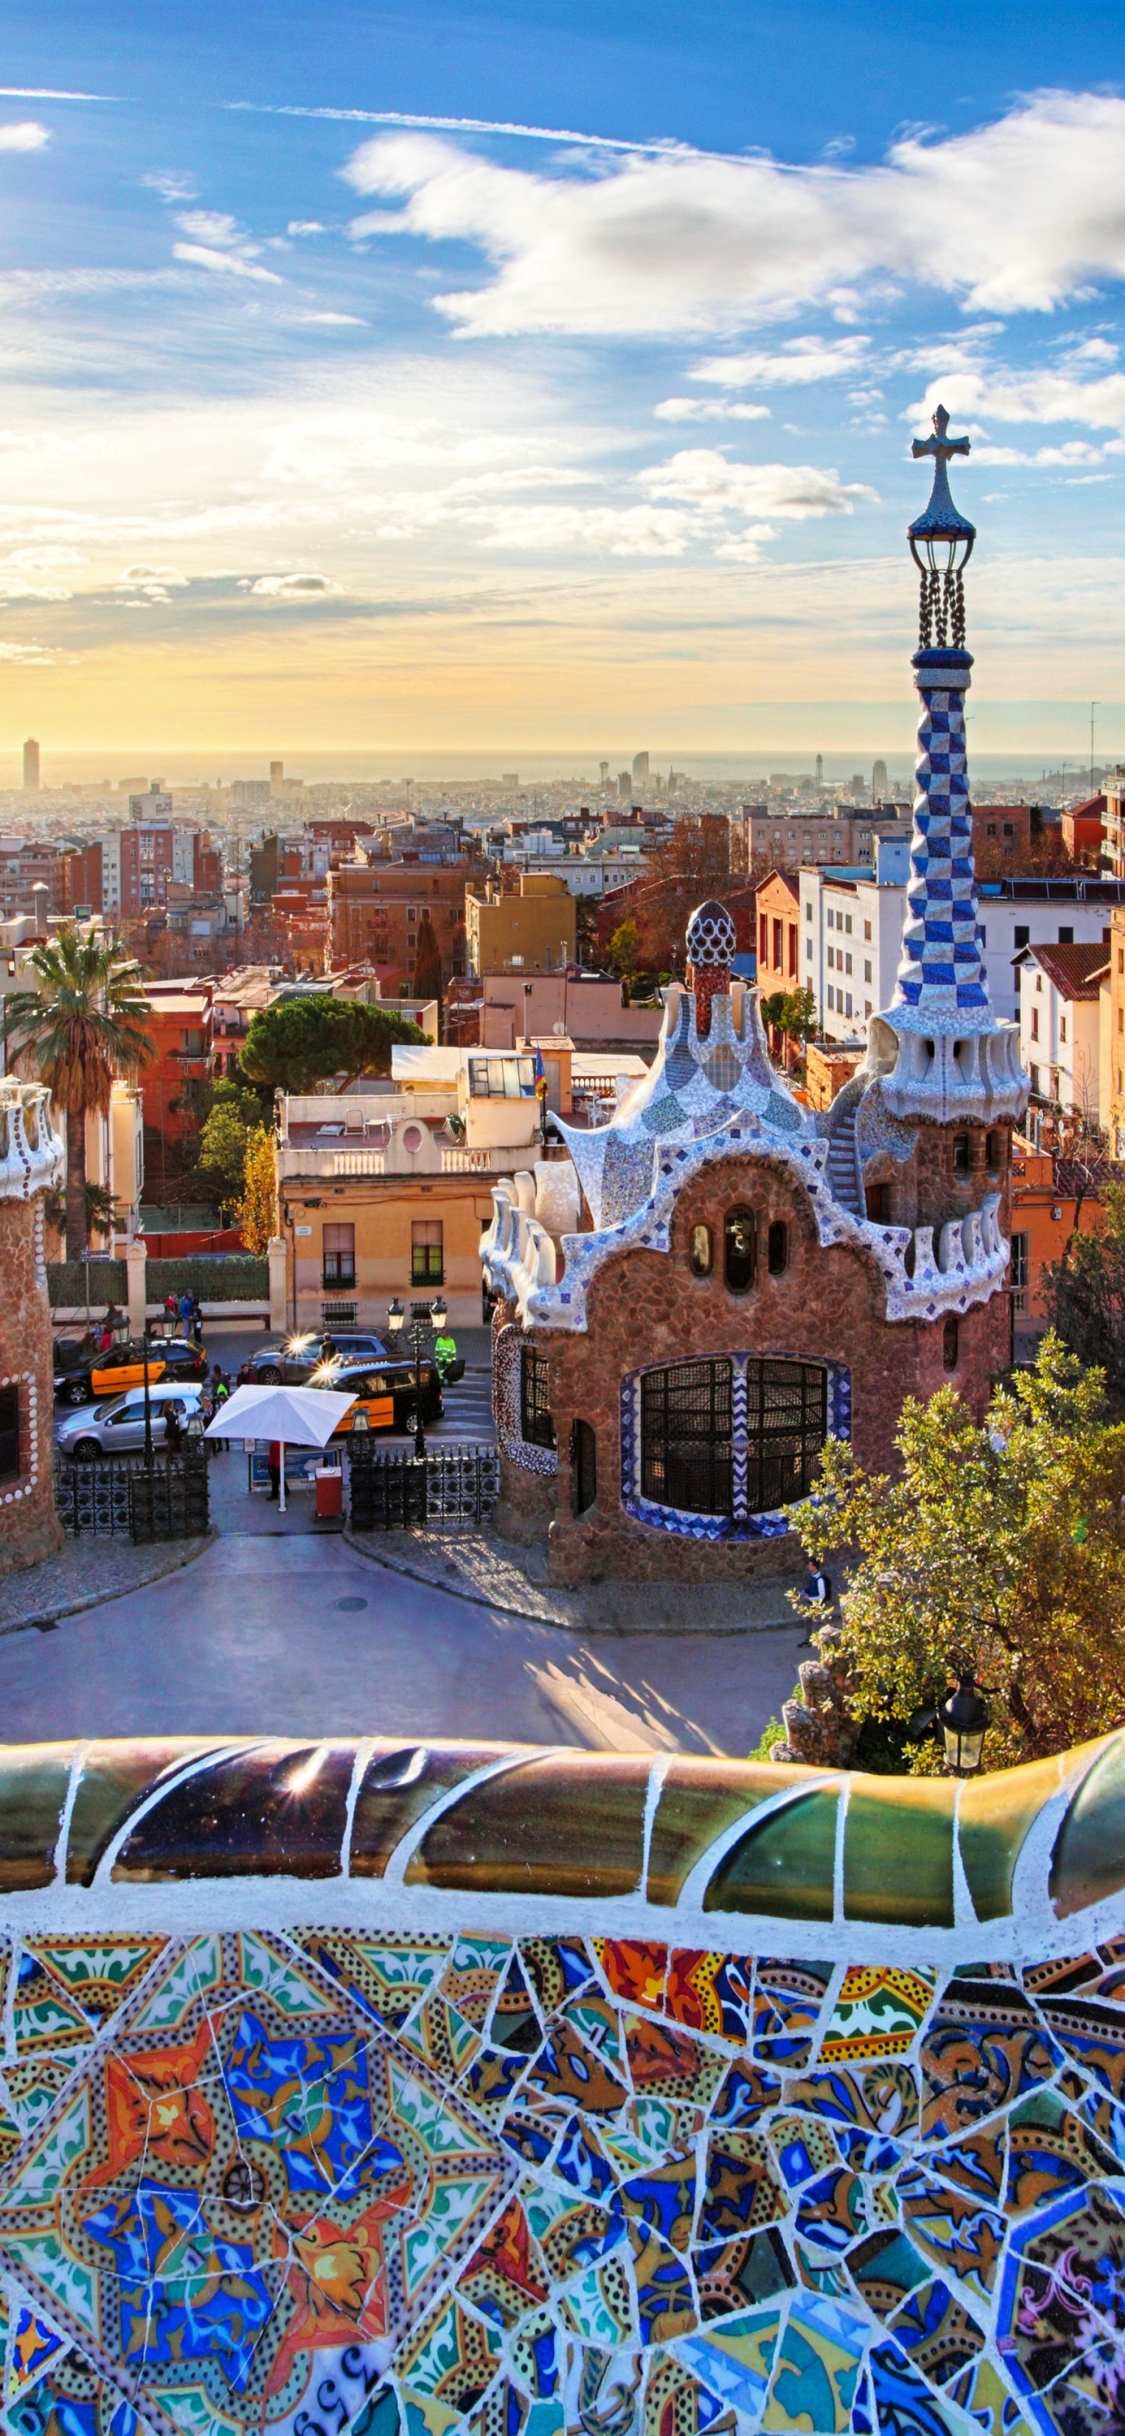 barcelona, man made, city, architecture, spain, cityscape, cities